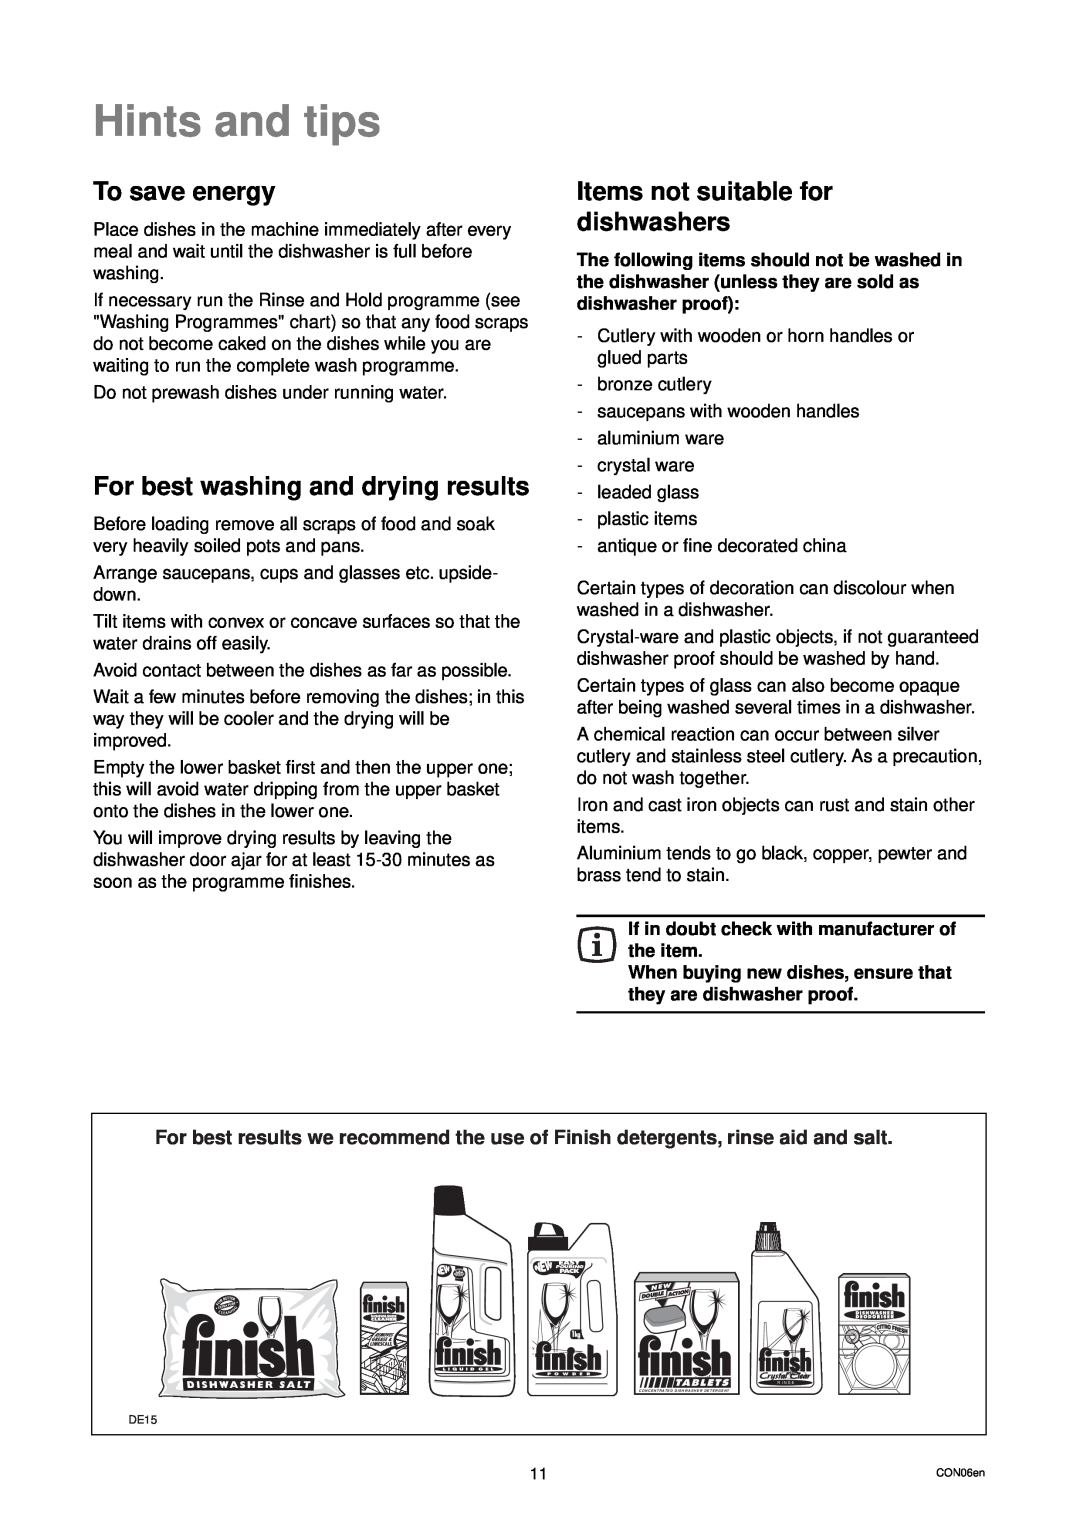 Zanussi DWS 39 Hints and tips, To save energy, For best washing and drying results, Items not suitable for dishwashers 